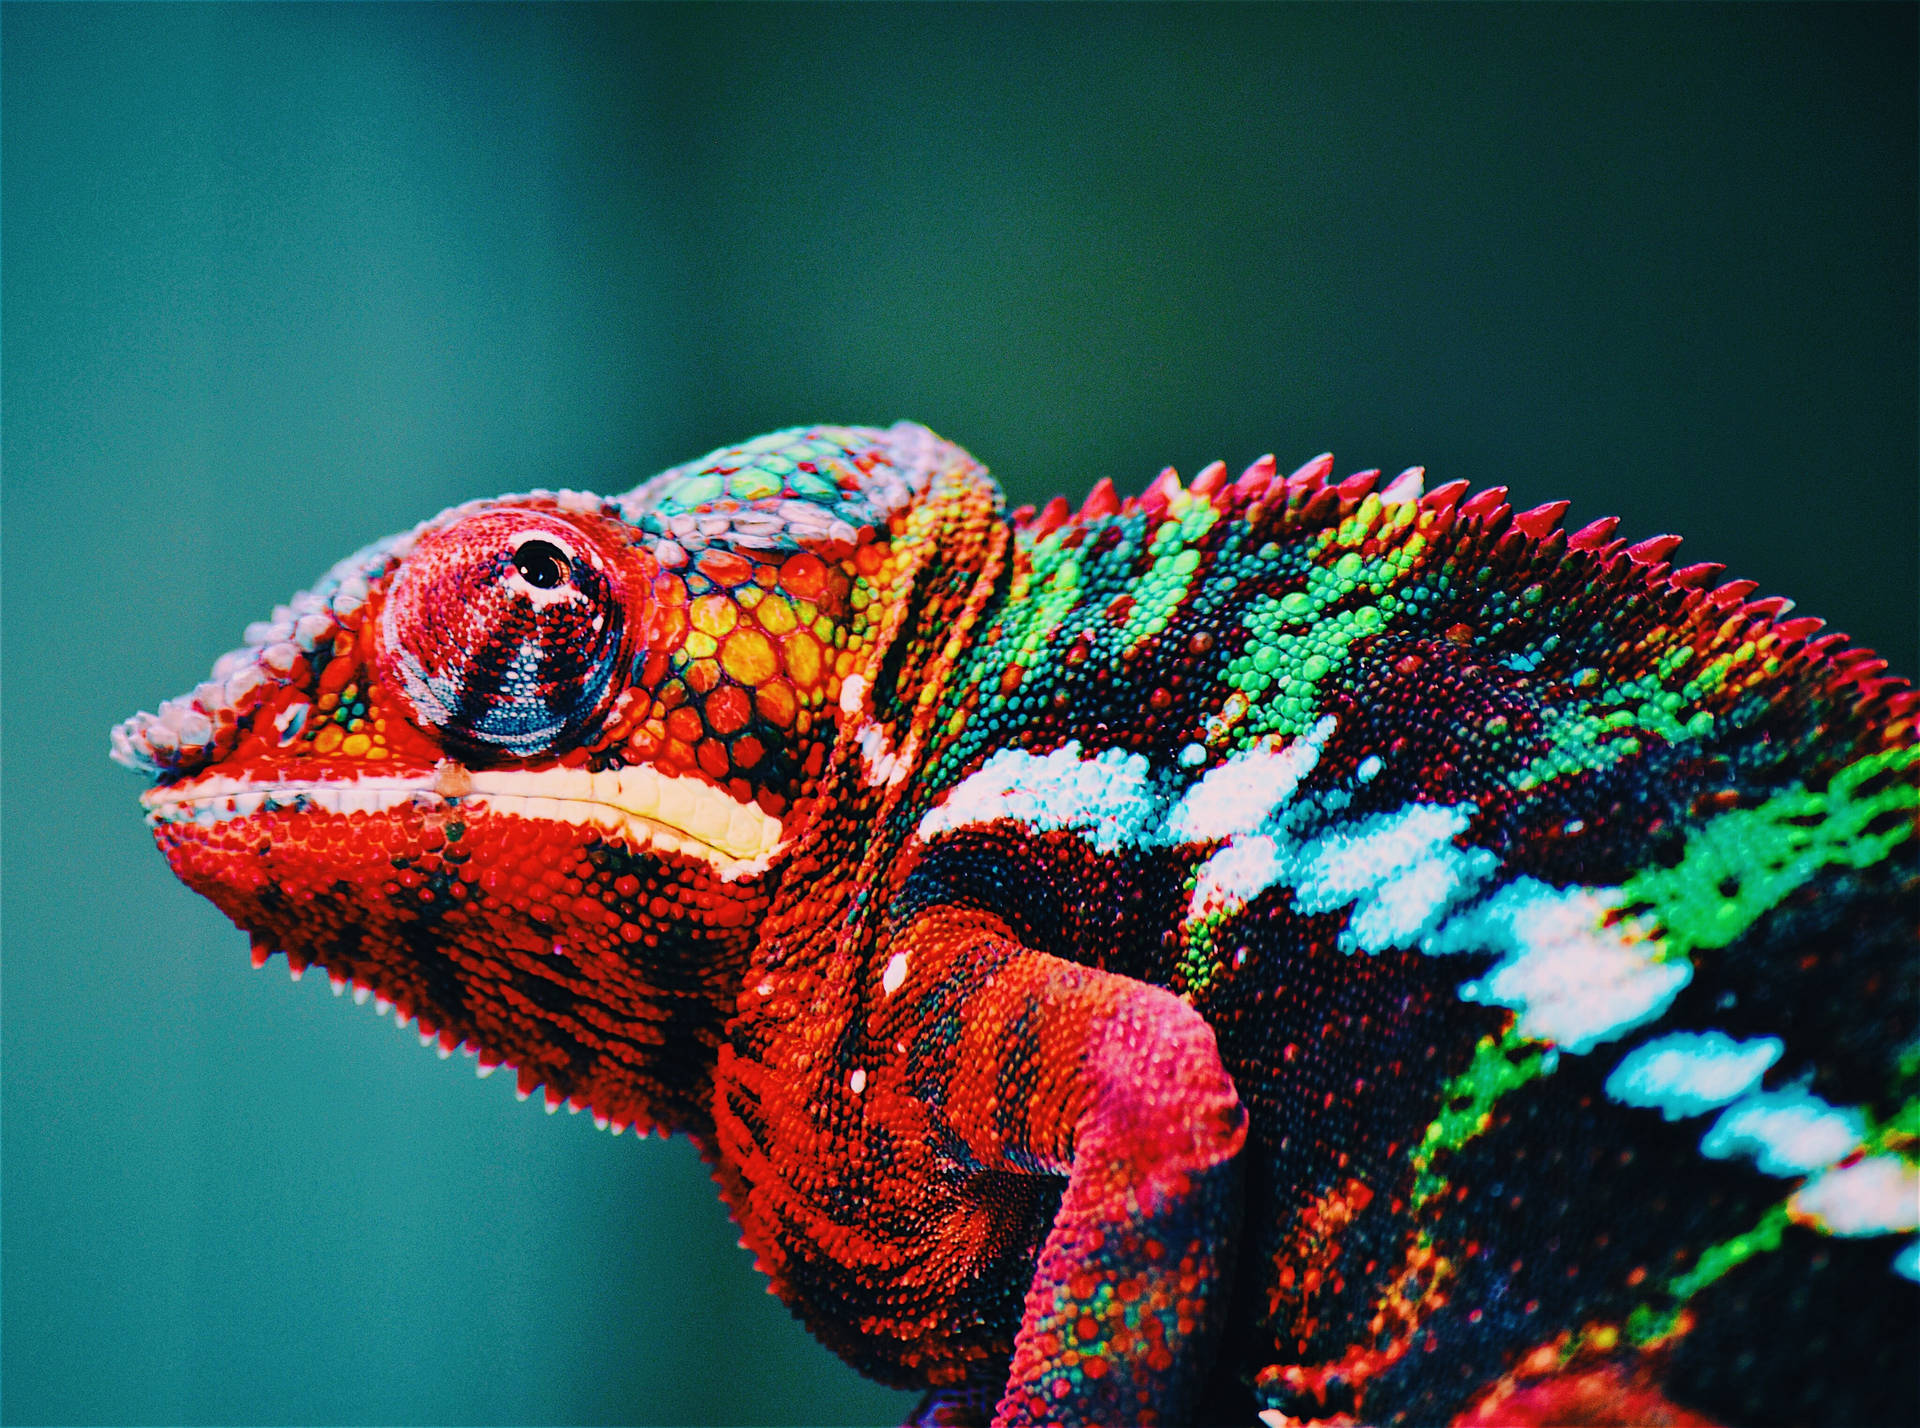 A Vibrant Display - Wild Chameleon In Nature